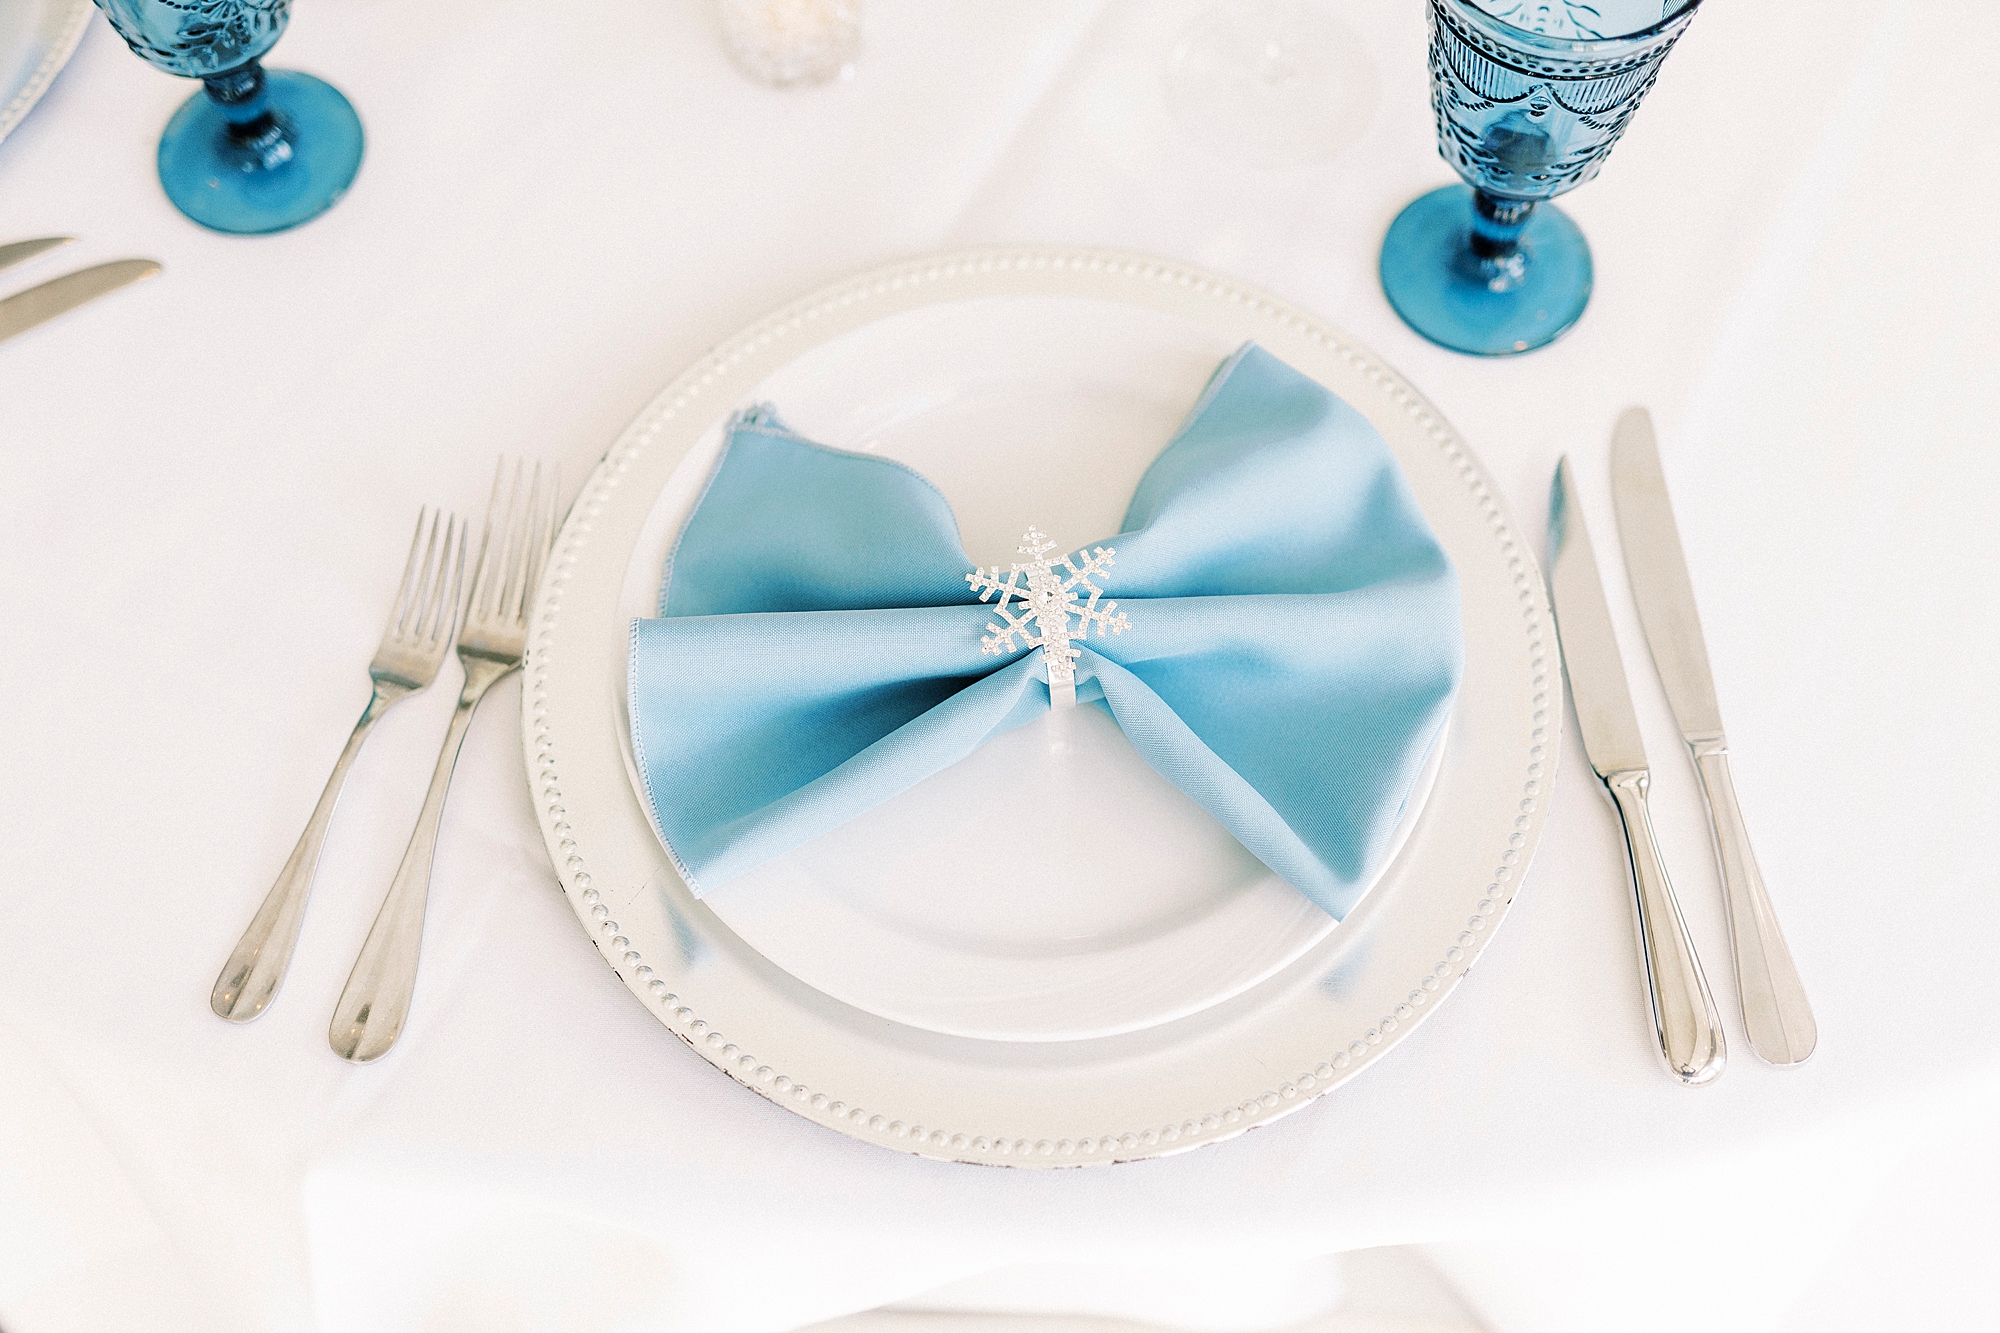 white and silver place setting with vintage blue glass and blue napkins